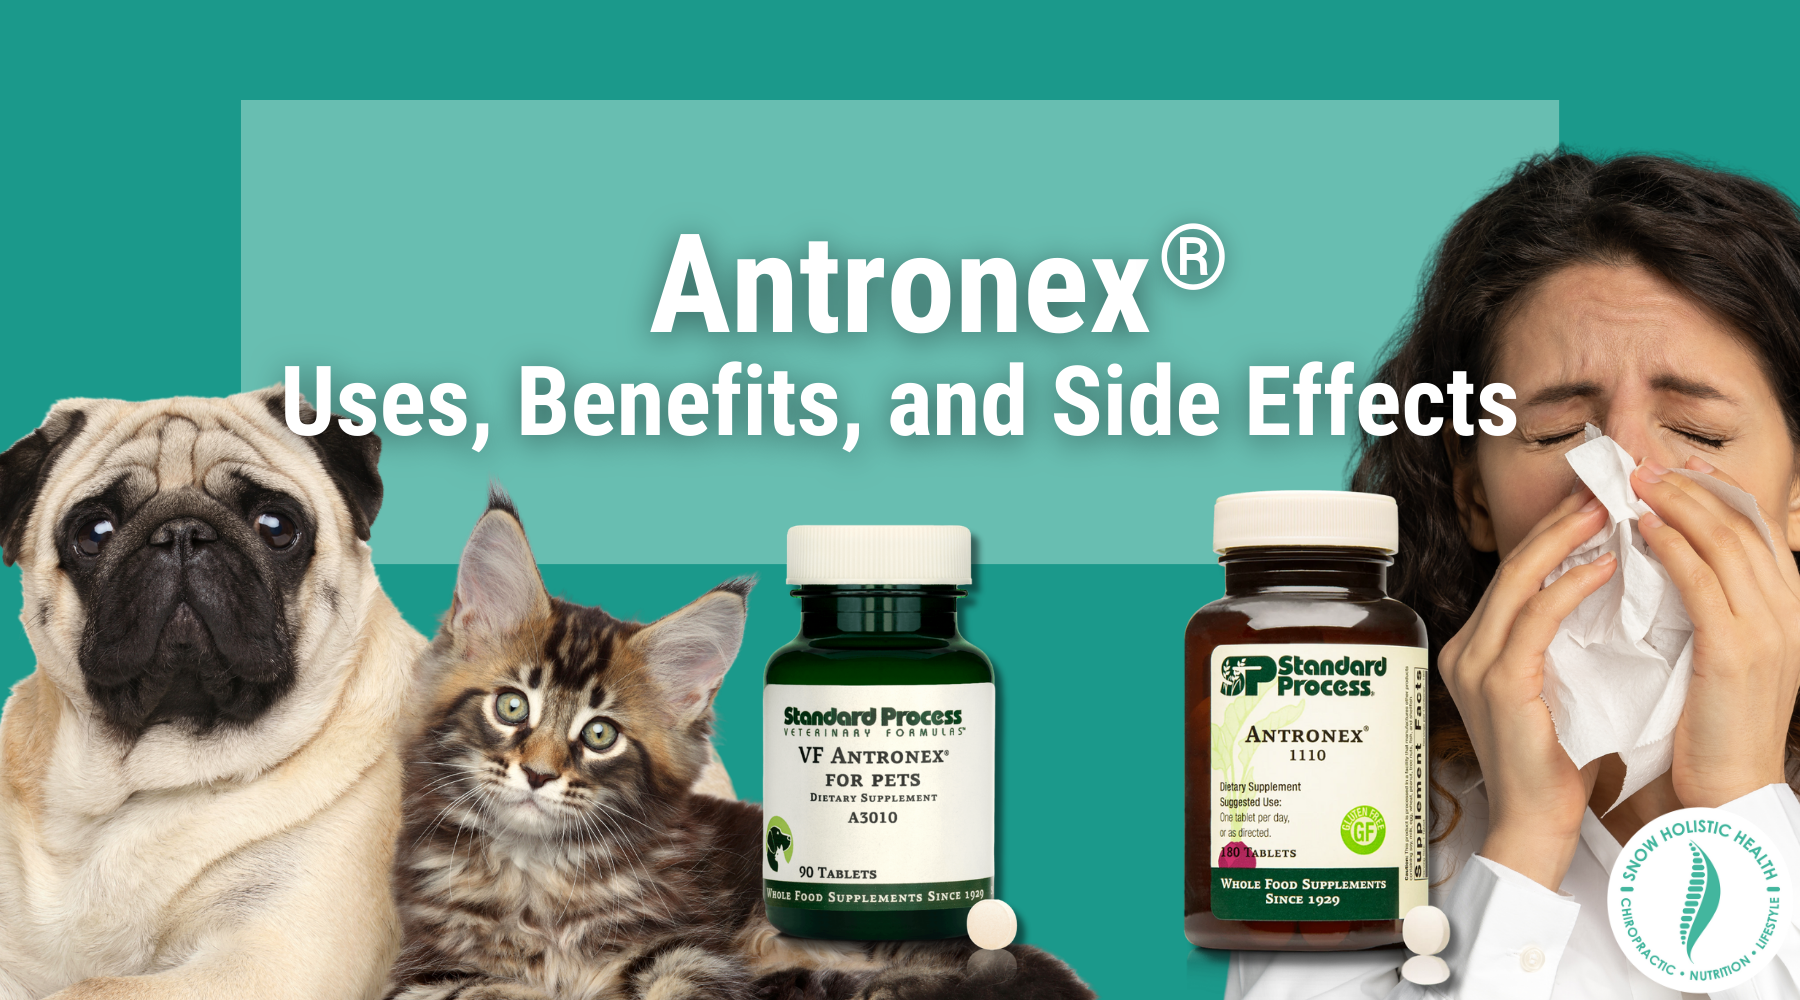 Antronex®: uses, benefits, and side effects